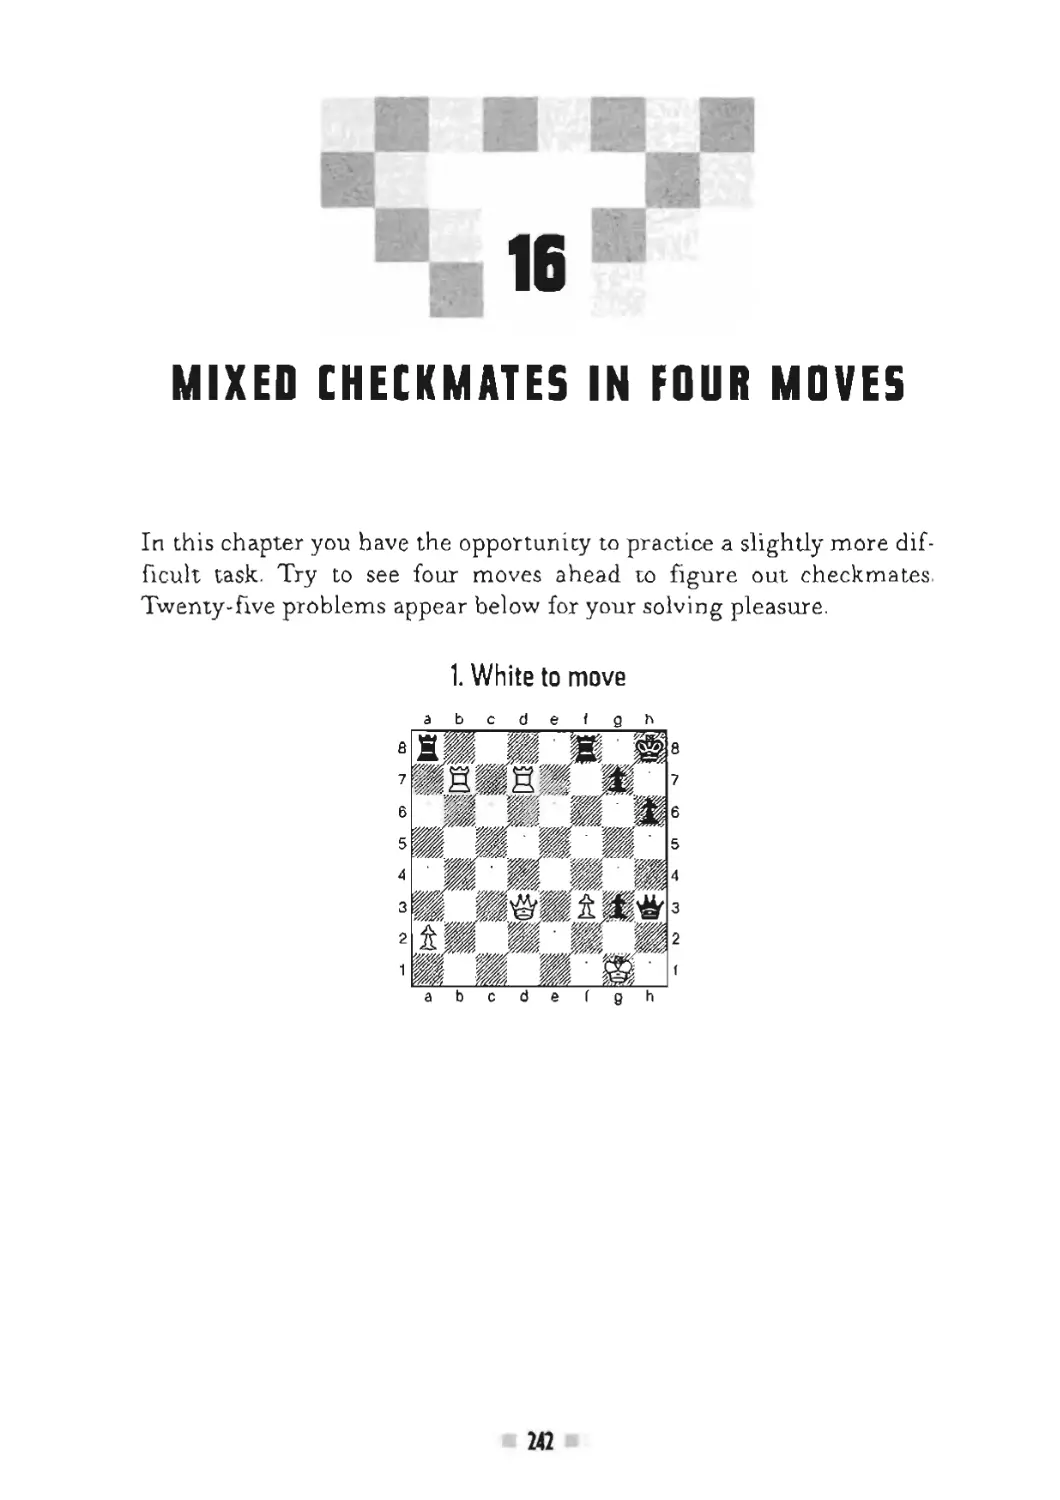 16 Mixed checkmates in four moves